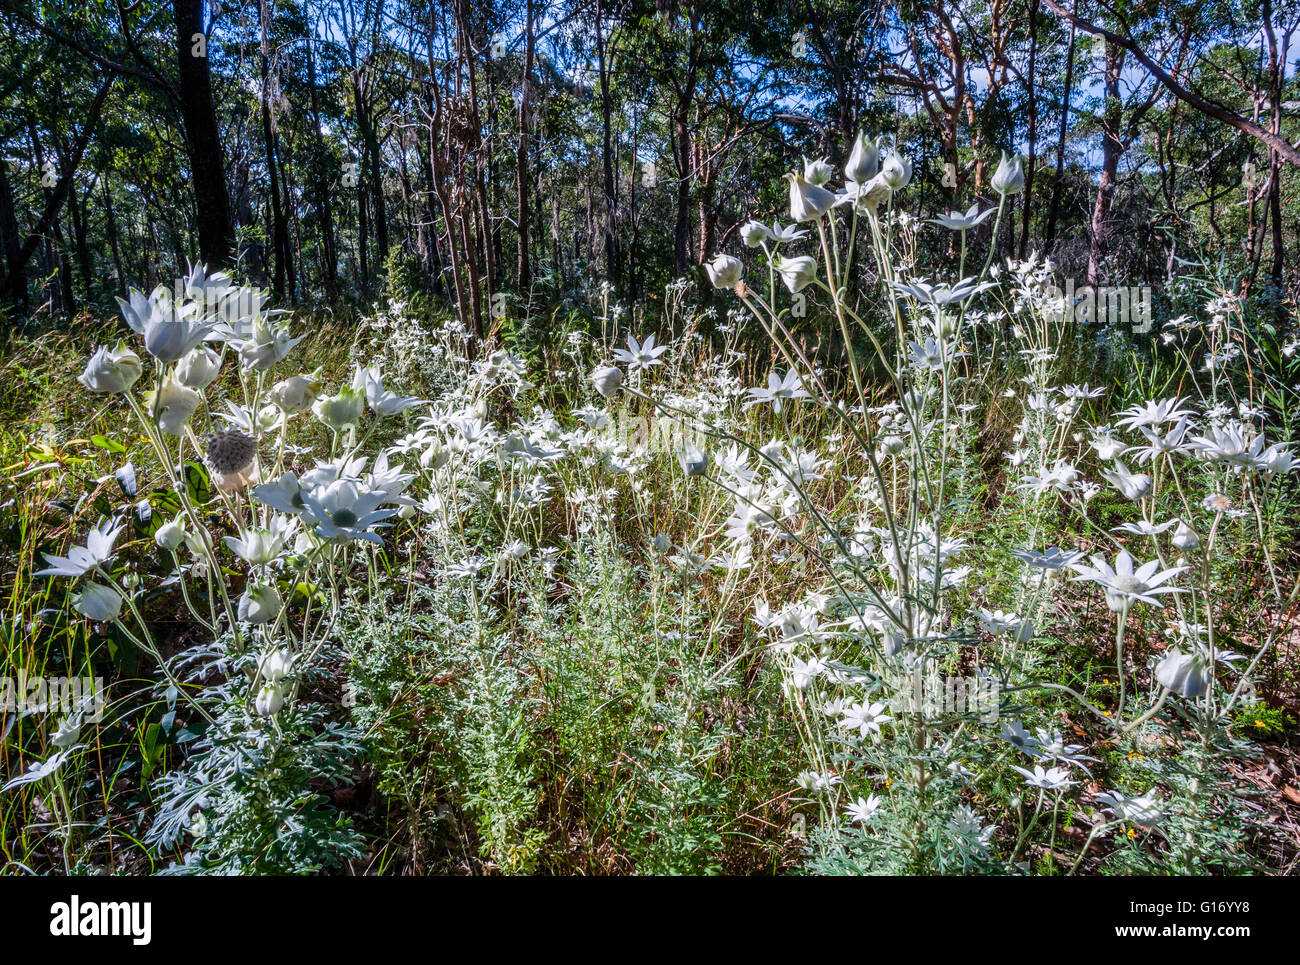 Australia, New South Wales, Central Coast, Flannel Flowers, Actinotus helianthi at Bouddi National Park Stock Photo